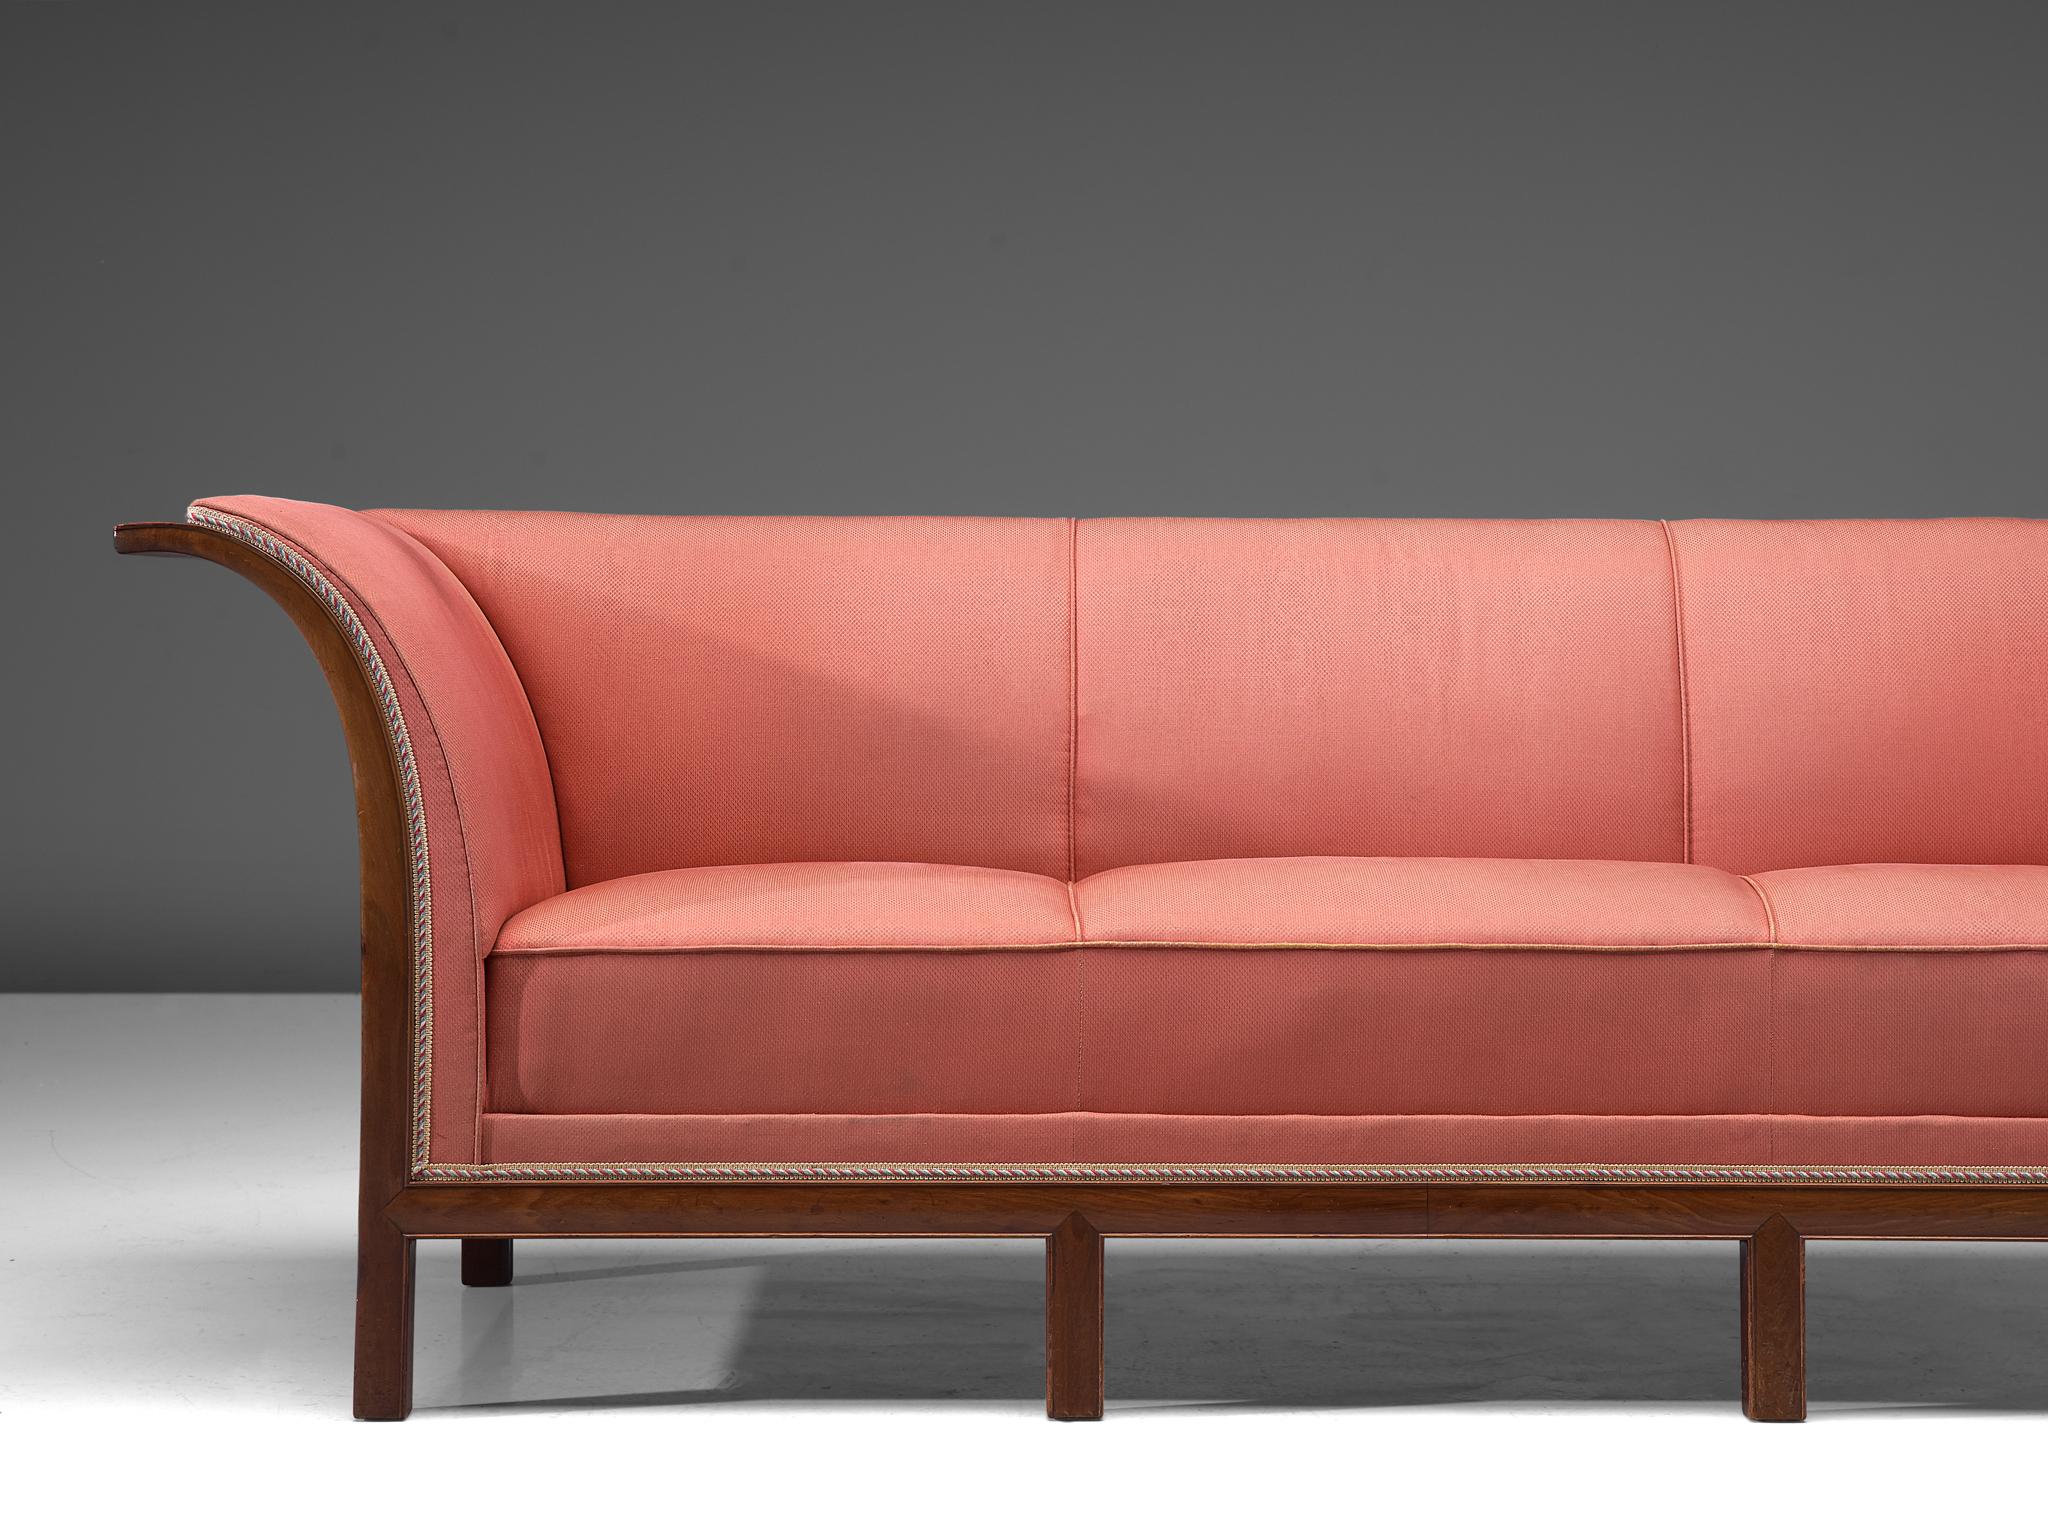 Danish Frits Henningsen Sofa in Mahogany and Pink Upholstery For Sale